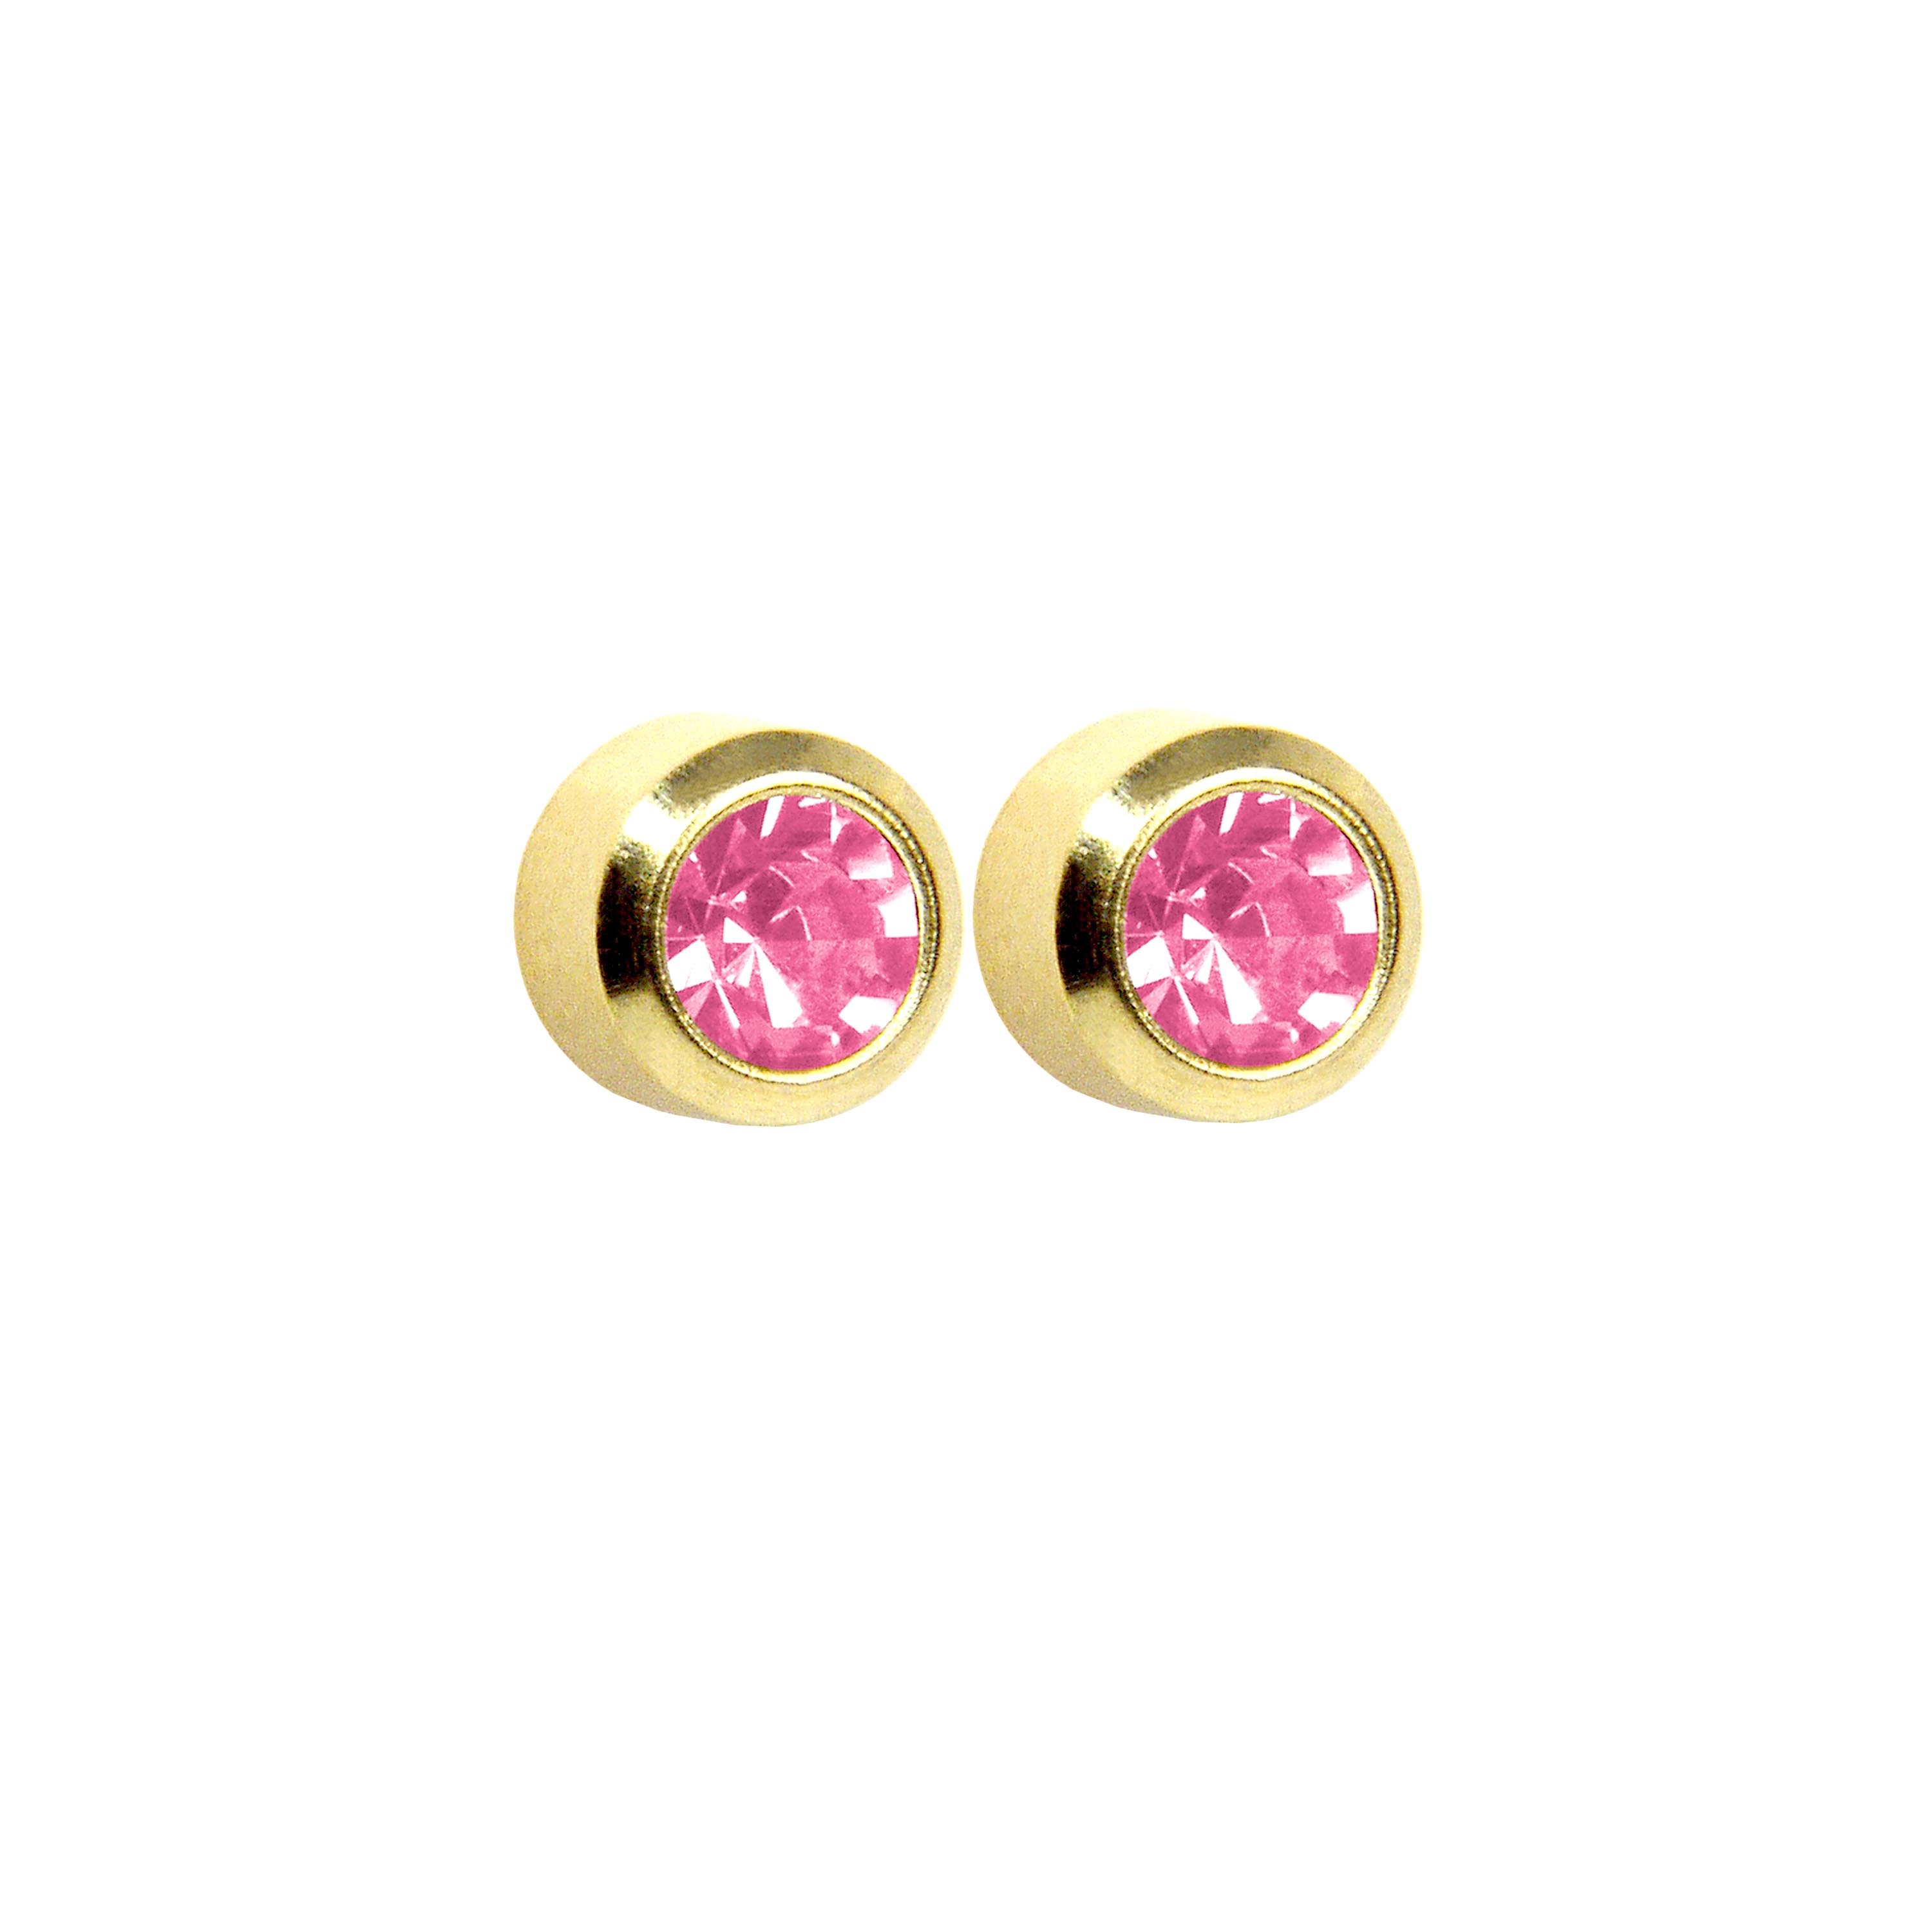 2MM - Bezel - October Rose - Pink | 24K Gold Plated Piercing Ear Studs come Fashion Earrings | Studex Select